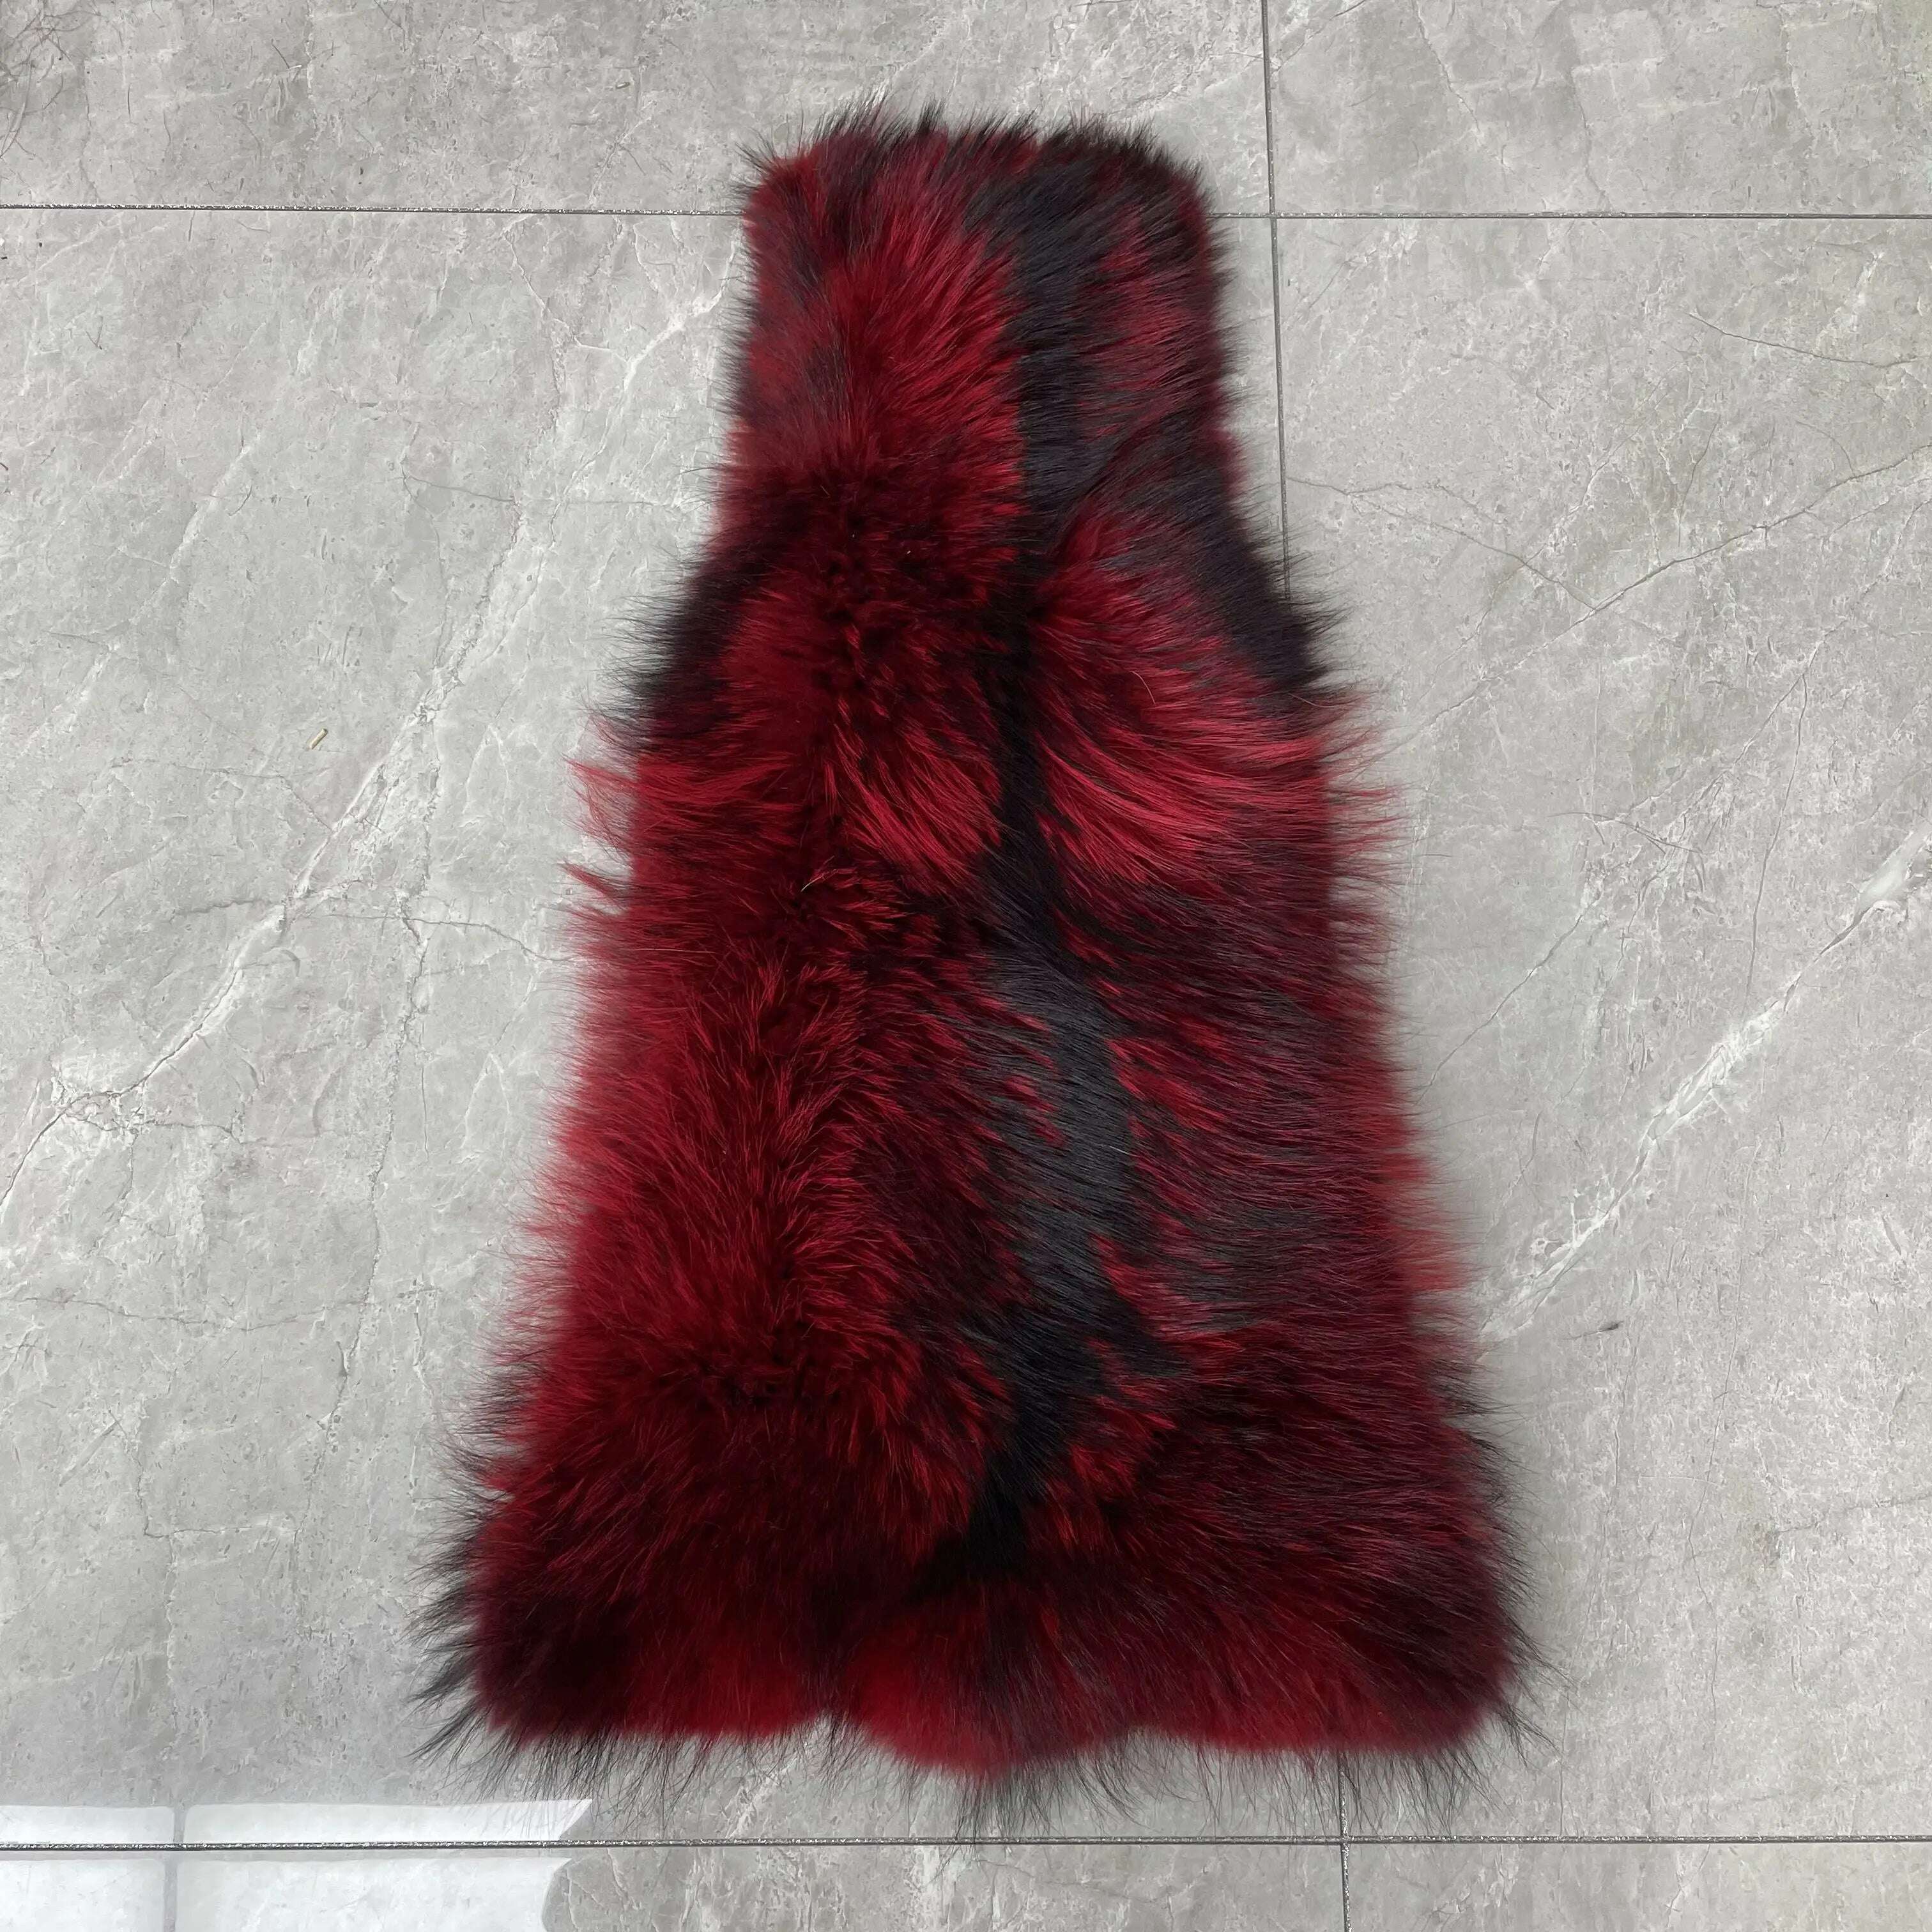 KIMLUD, Men Clothes Golden Island White Special Fox Fur Coat Full Pelt Customized Size Available, RED / XS(88cm), KIMLUD Women's Clothes